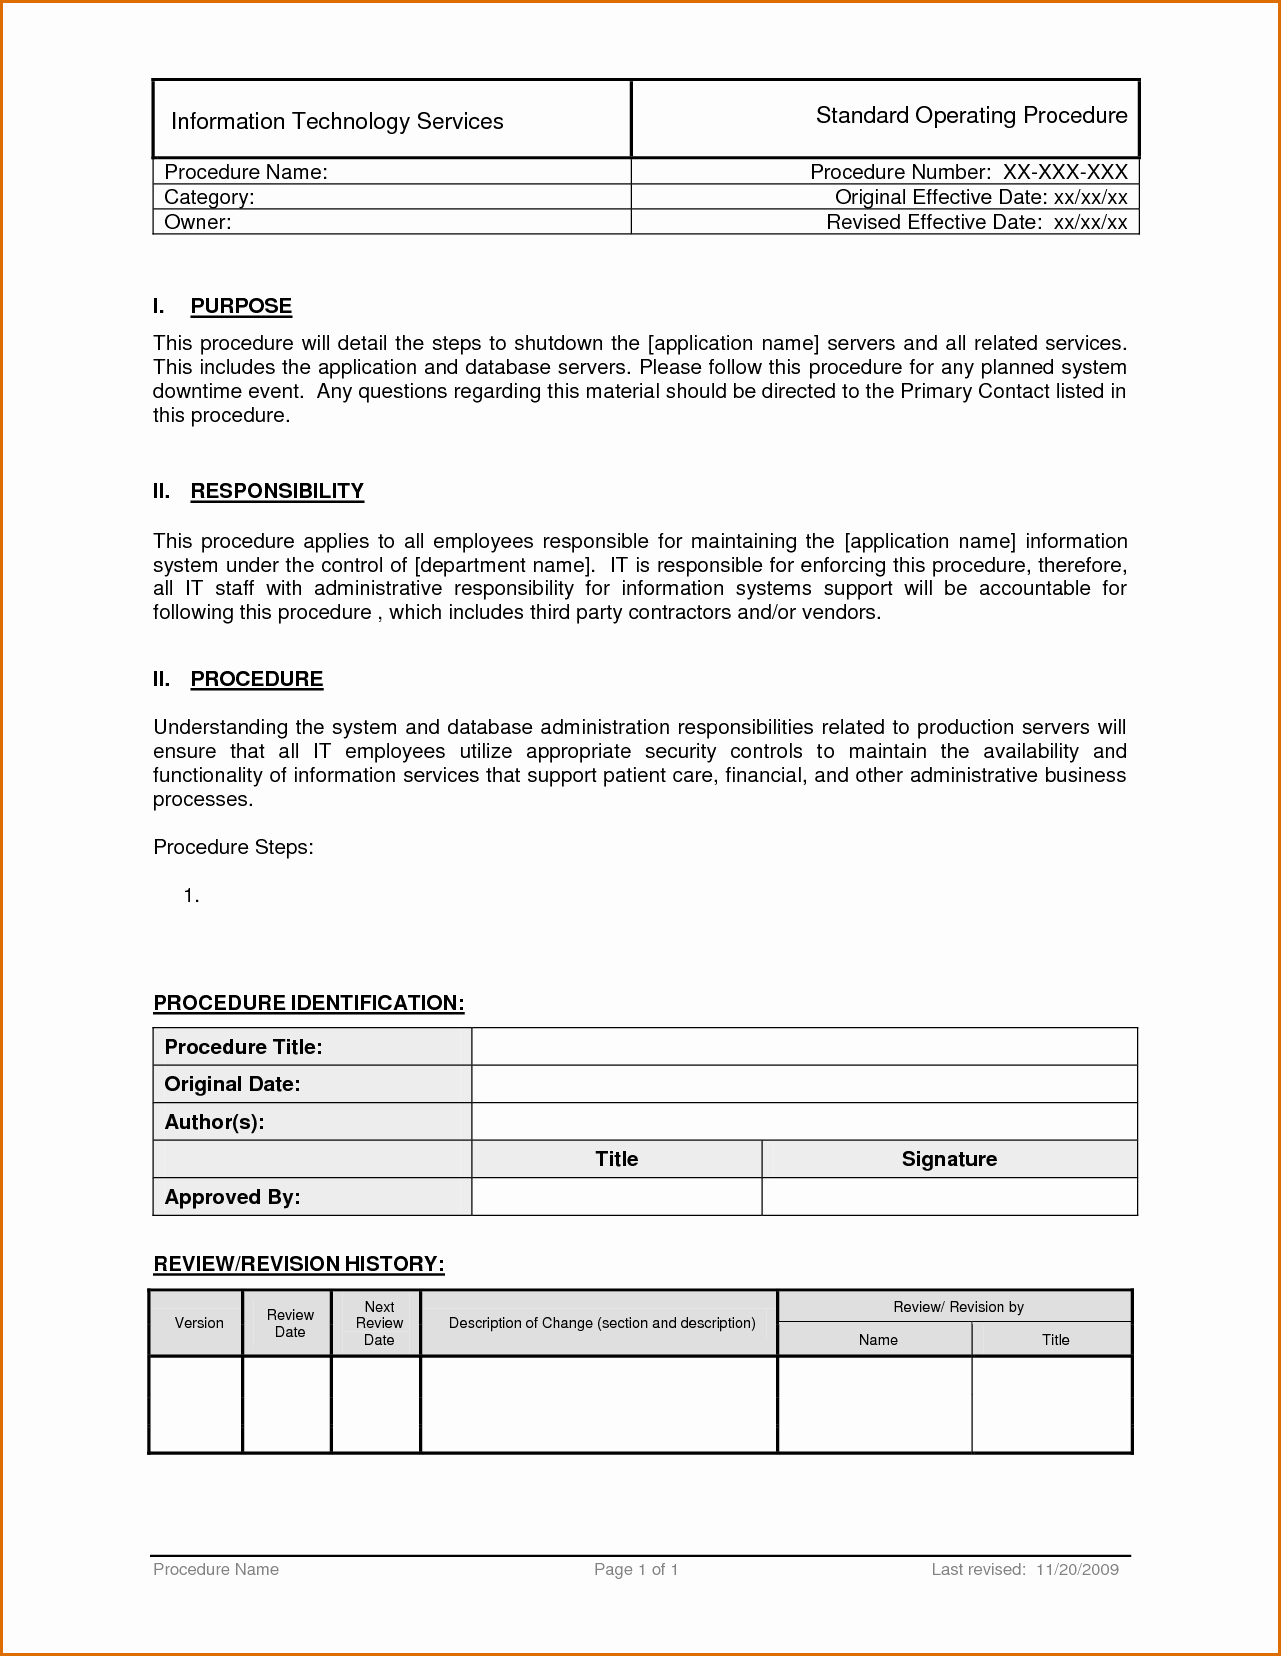 Standard Operating Procedure Example Awesome 8 Procedure Template